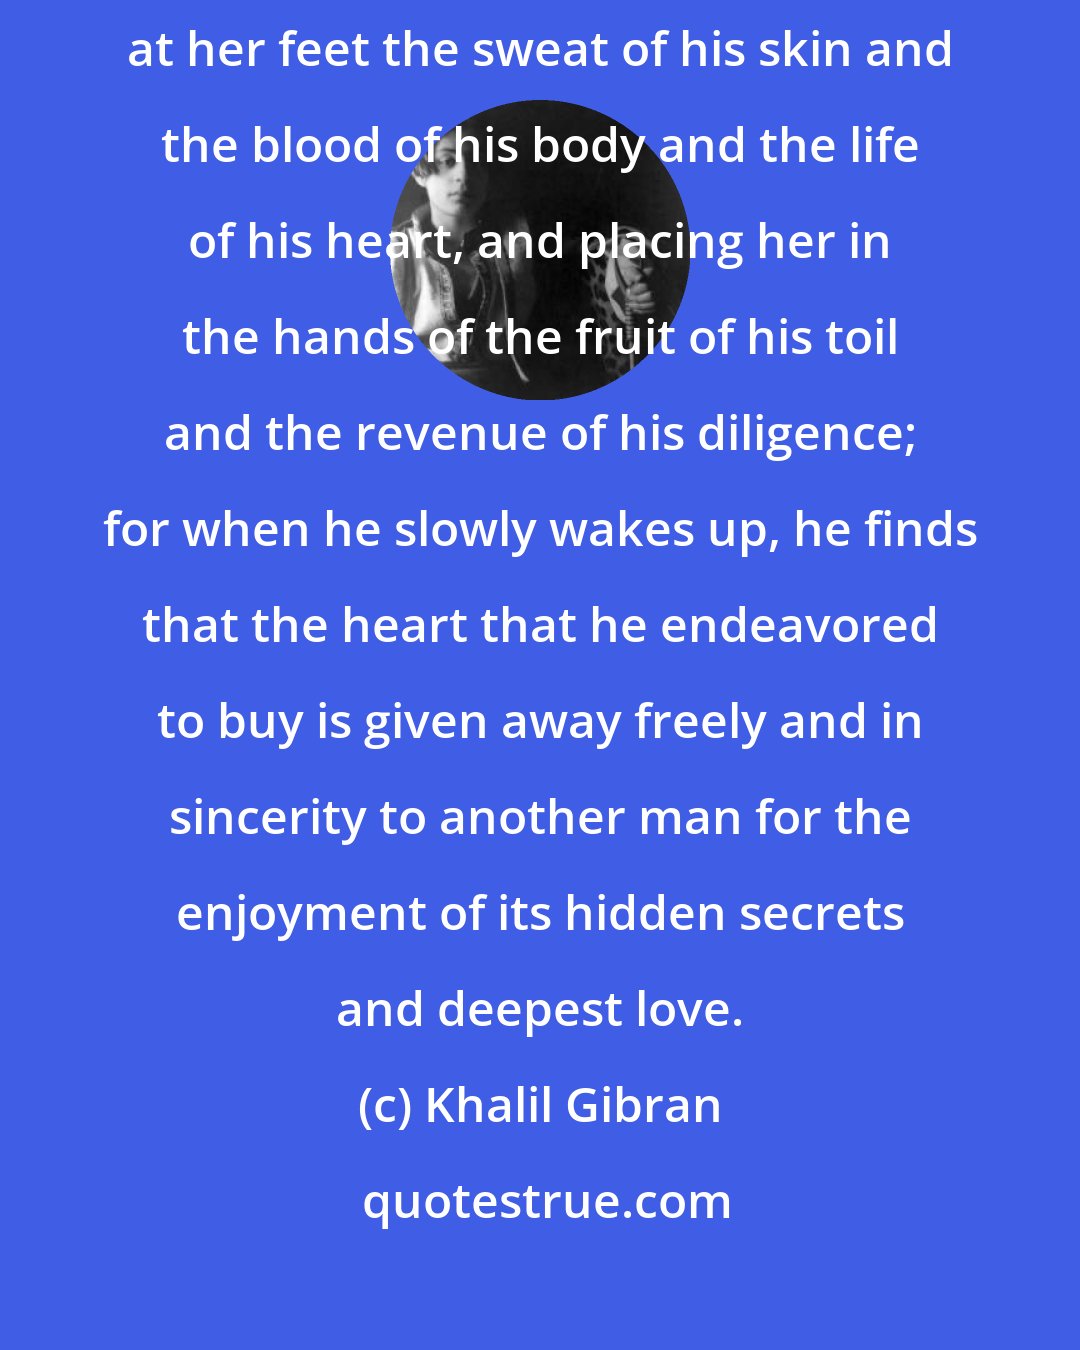 Khalil Gibran: Miserable is the man who loves a woman and takes her for his wife, pouring at her feet the sweat of his skin and the blood of his body and the life of his heart, and placing her in the hands of the fruit of his toil and the revenue of his diligence; for when he slowly wakes up, he finds that the heart that he endeavored to buy is given away freely and in sincerity to another man for the enjoyment of its hidden secrets and deepest love.